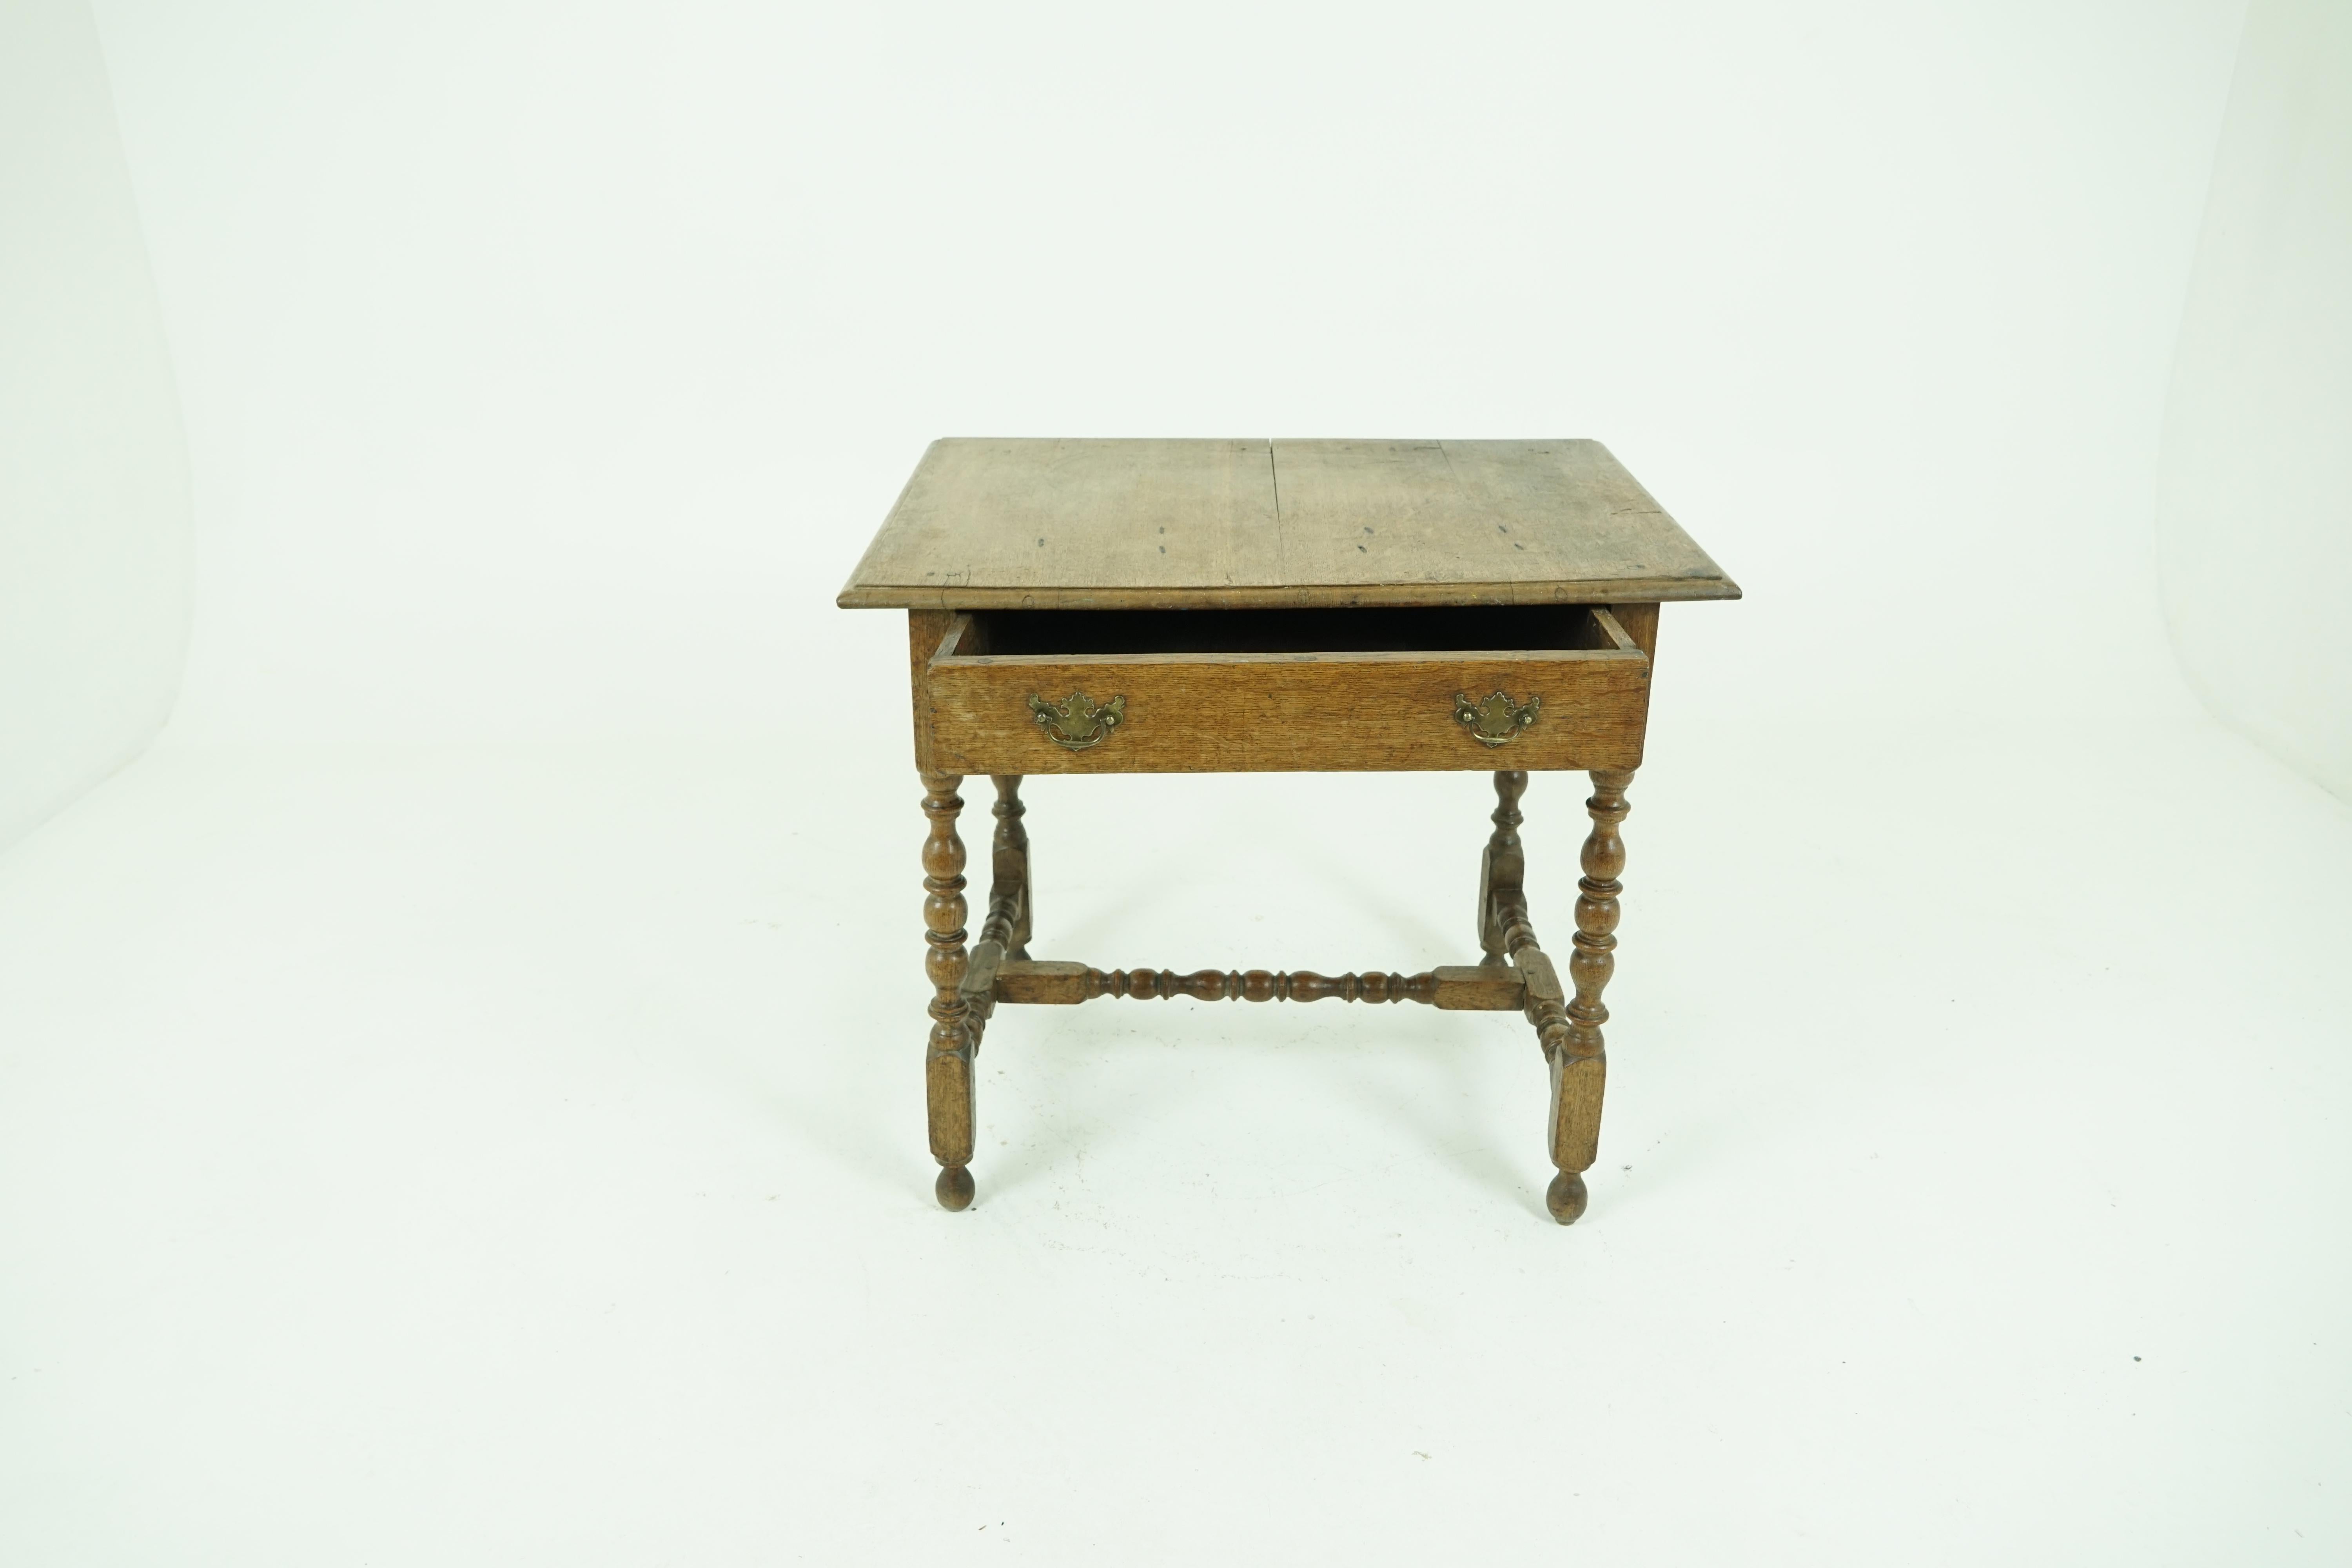 Antique oak table, 18th century Georgian writing table, desk, or hall table, Antique Furniture, Scotland, B1683

Scotland, late 18th century
Solid oak construction
Original finish
Rectangular top with beveled edge
Single dovetailed drawer with